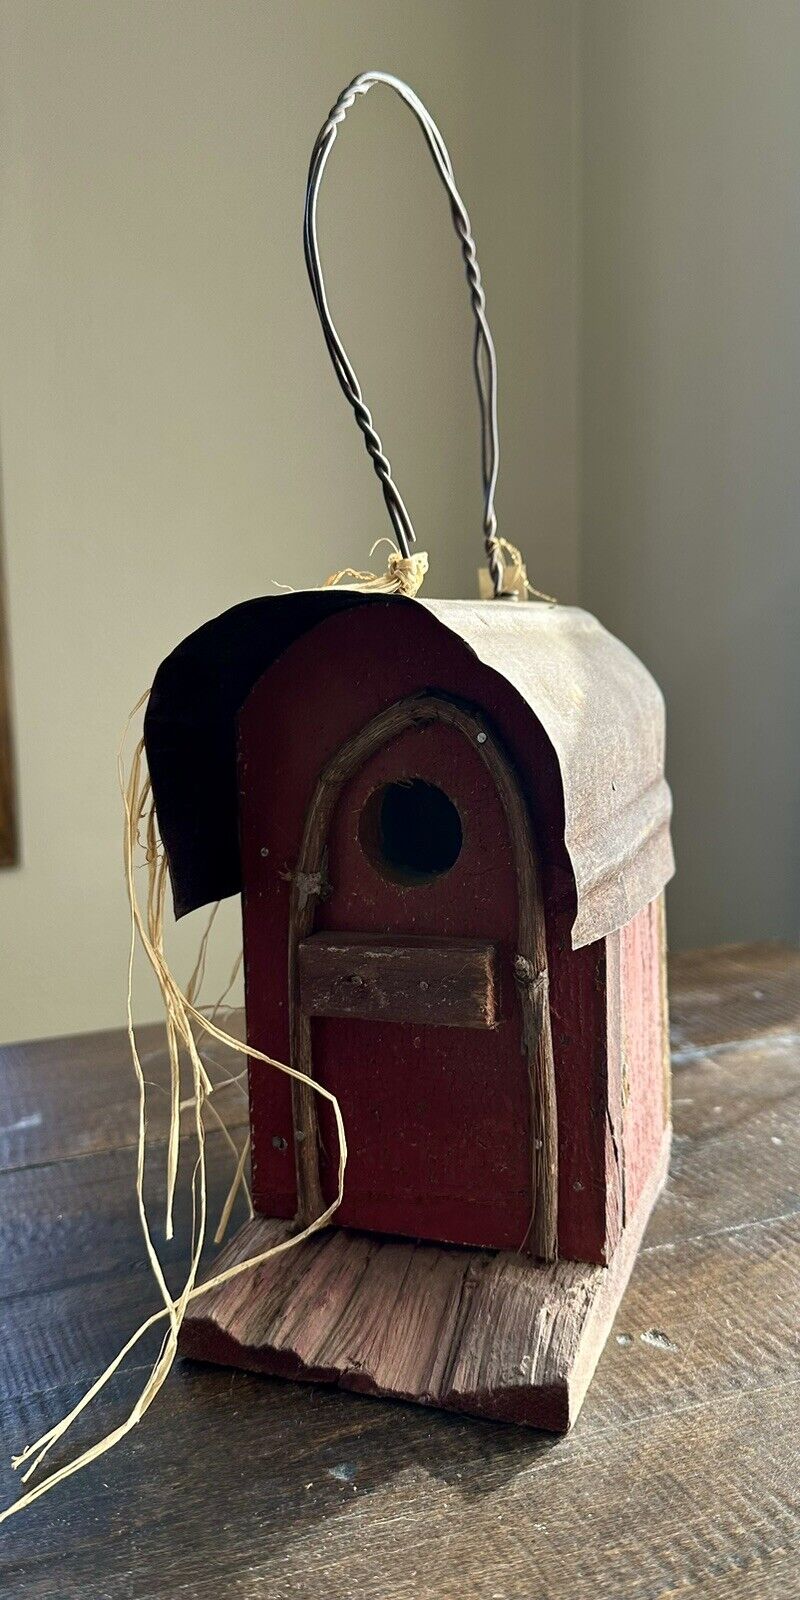 Rustic Unique Tin & Barn Wood Birdhouse Built  Materials Salvaged From Tornado